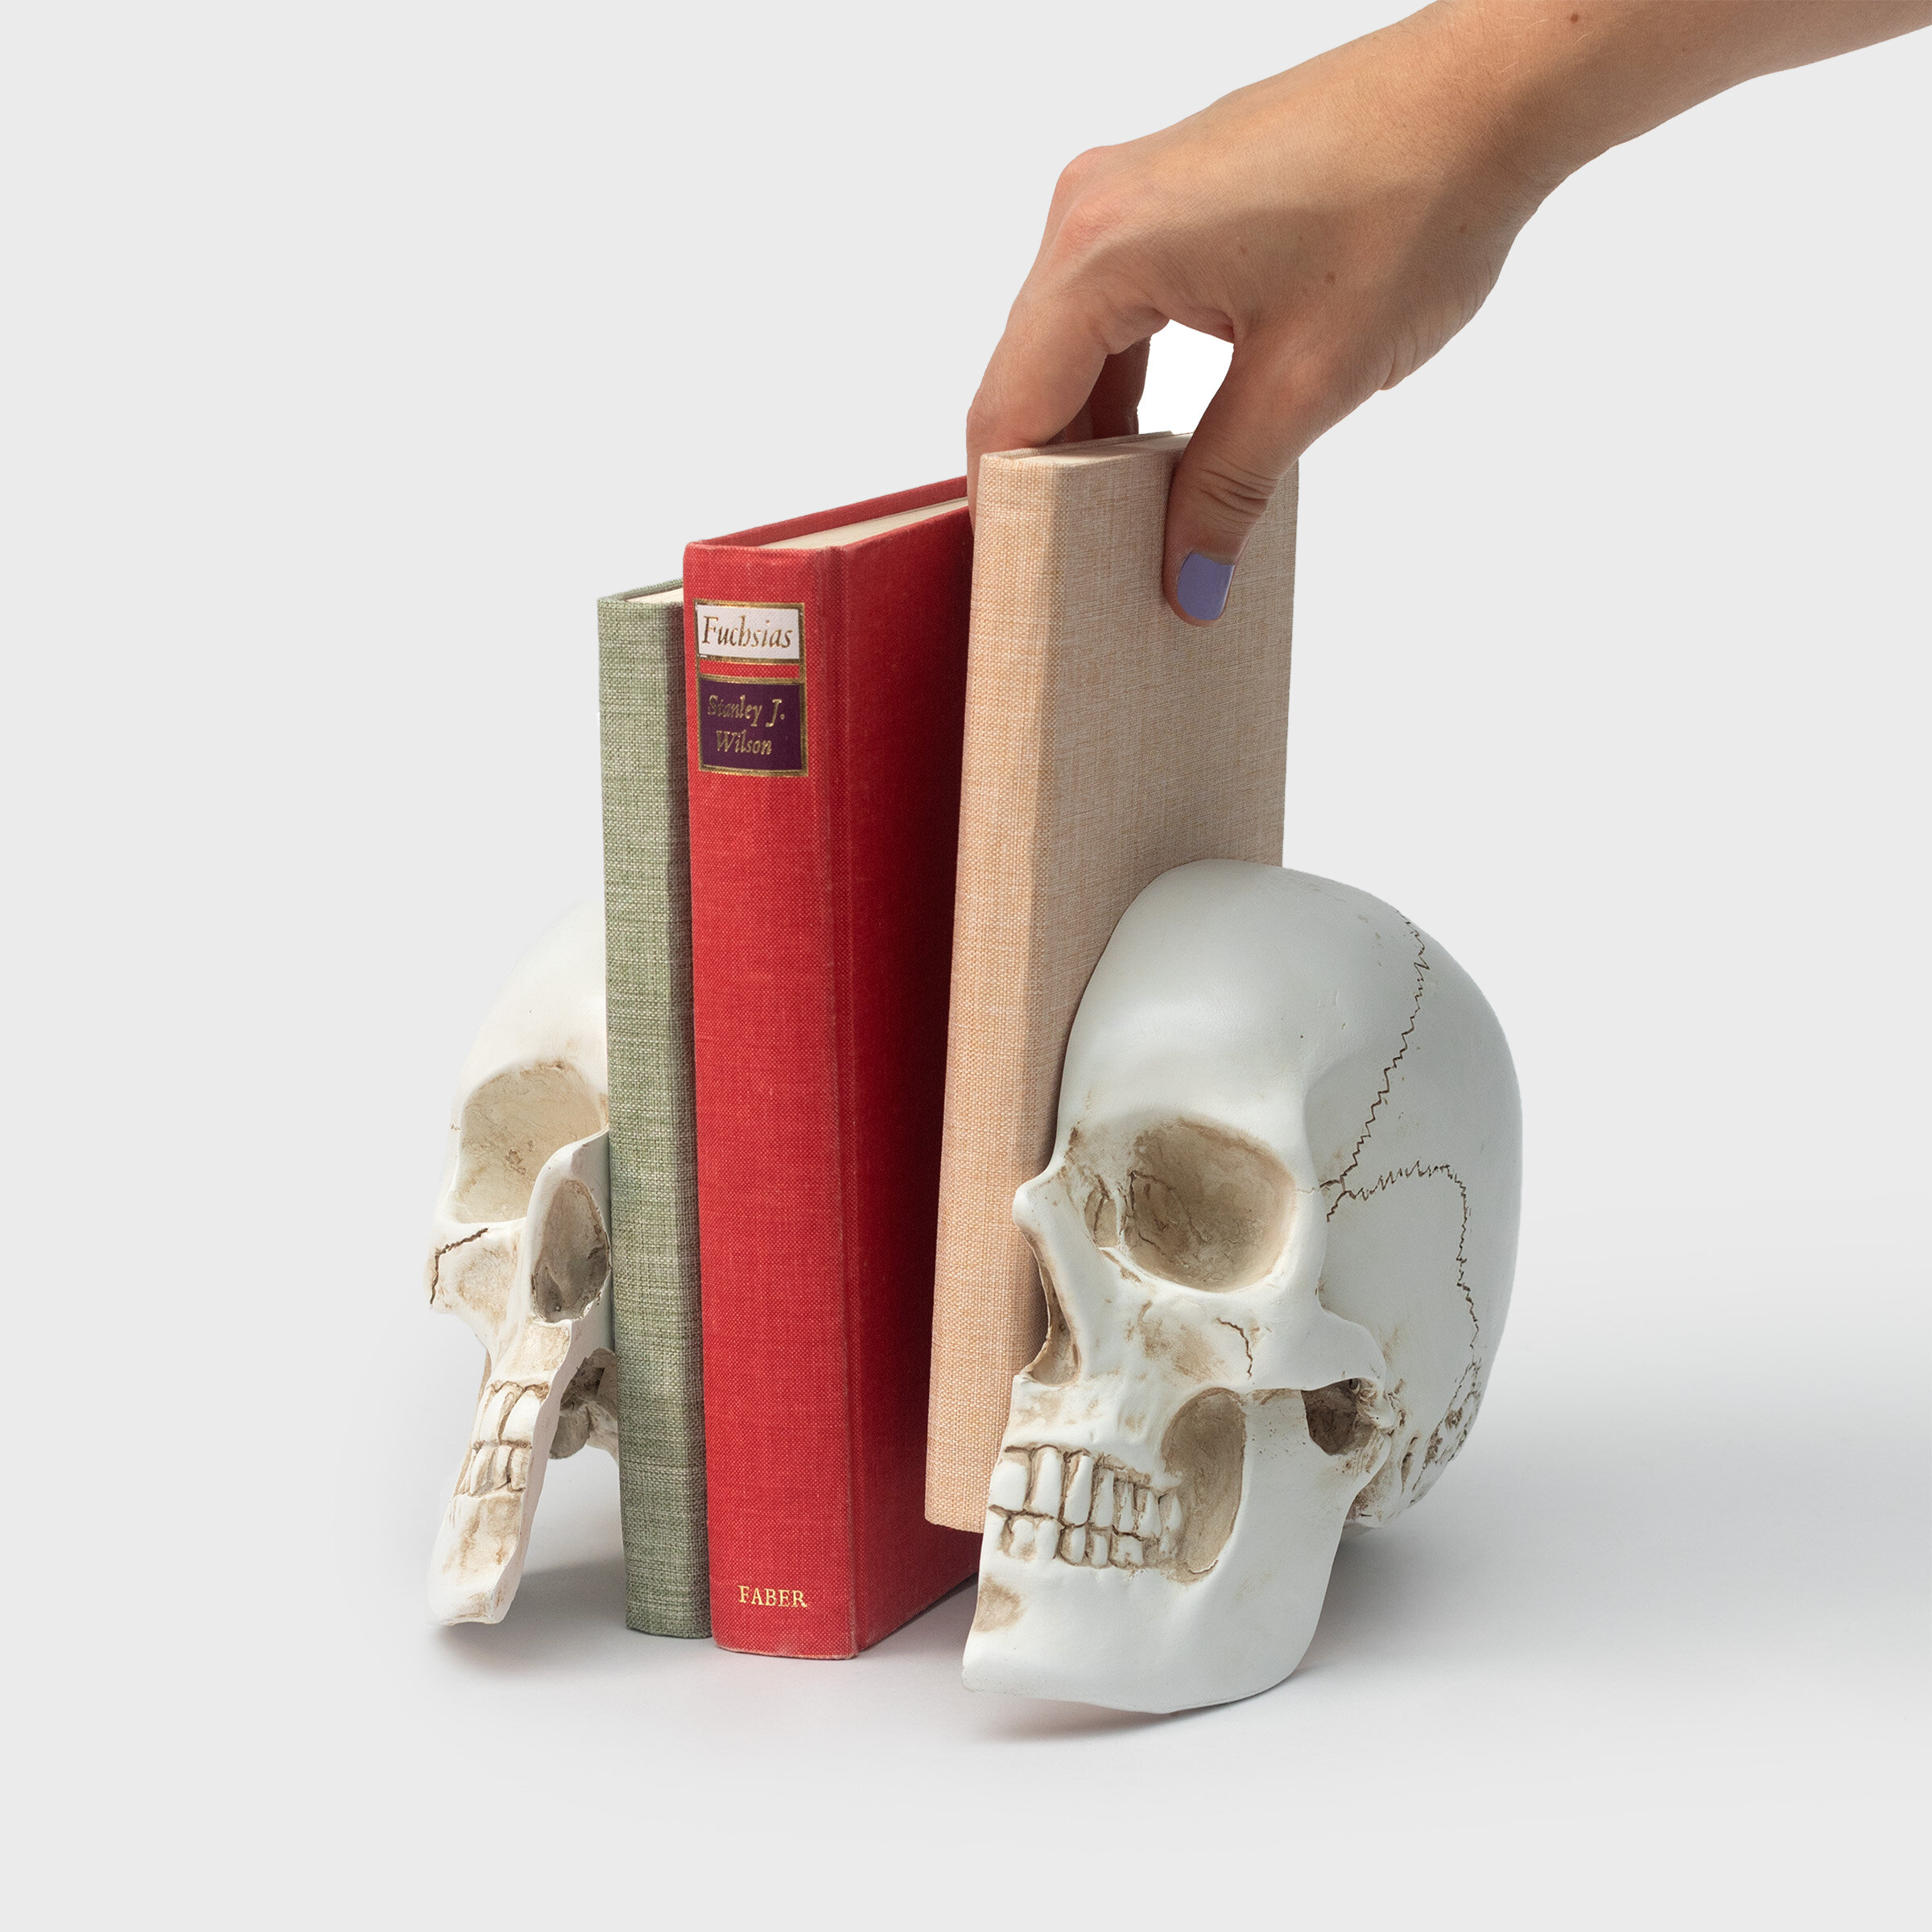 hand picking book from between skull bookends